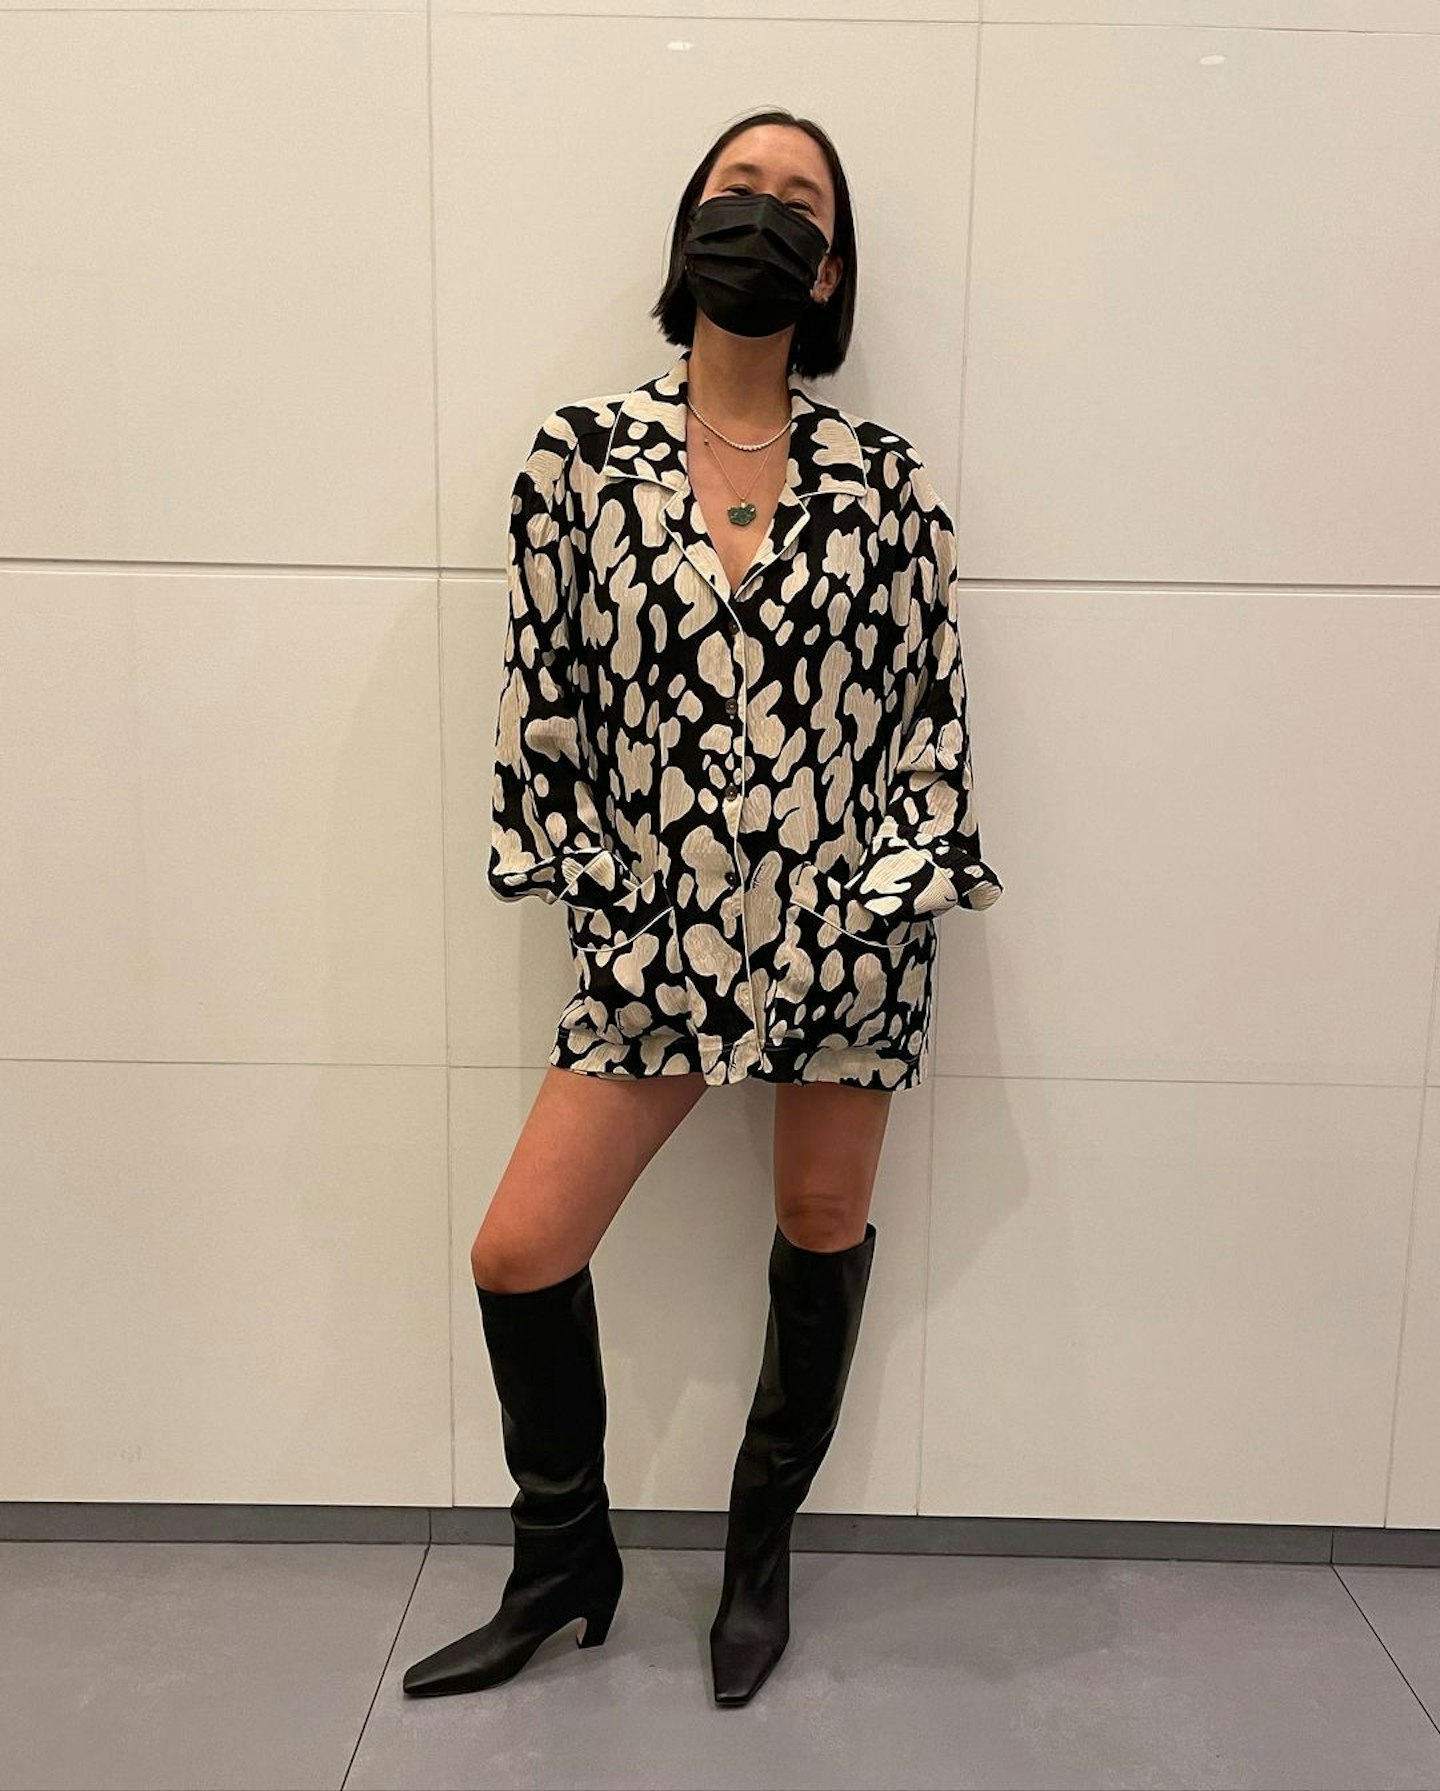 Eva Chen wearing a minidress and knee-high boots